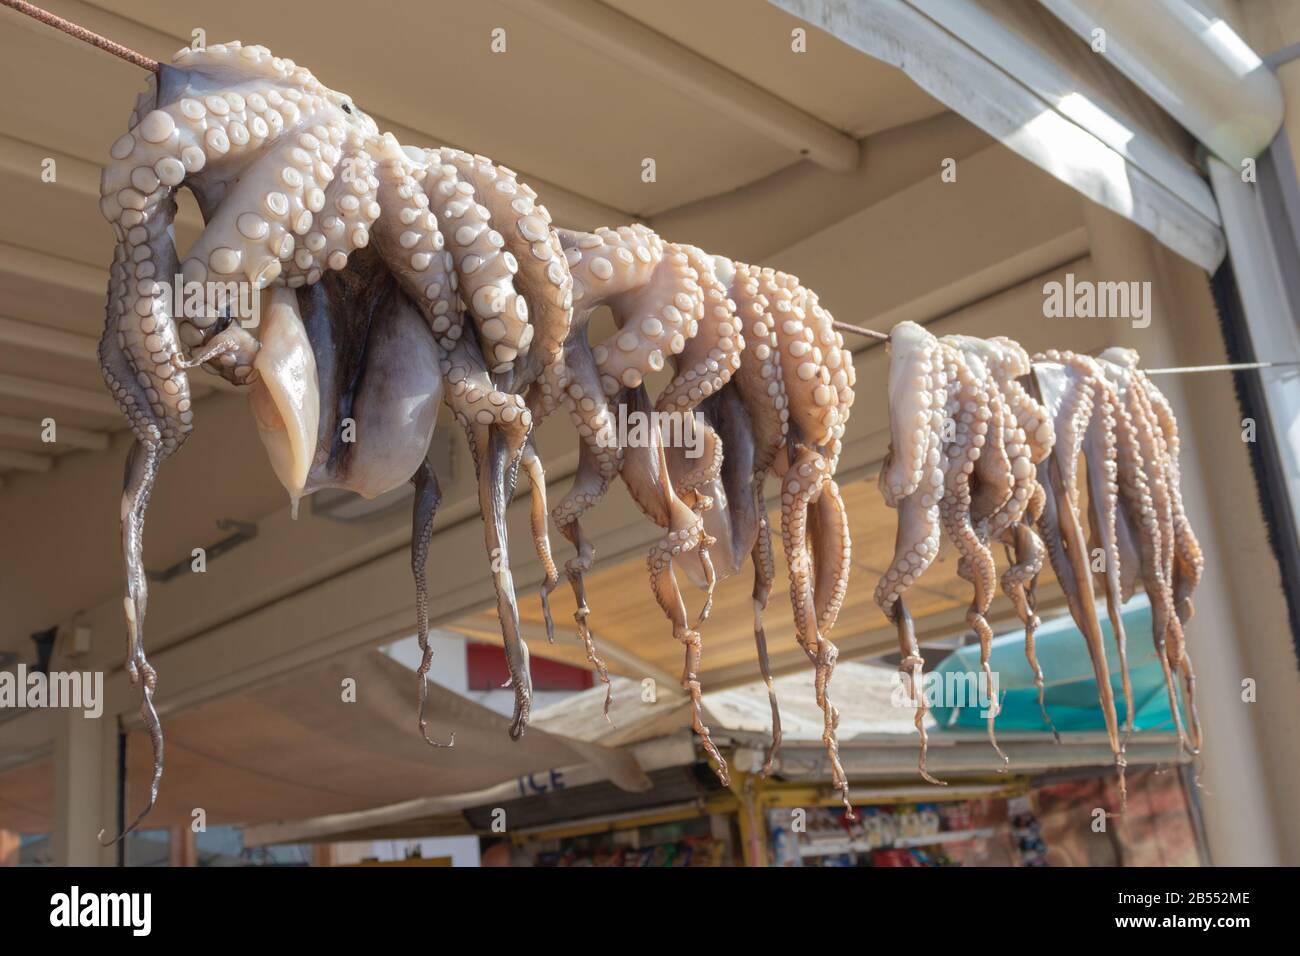 Octopus tentacles drying in the sun near a cafe in greece Stock Photo